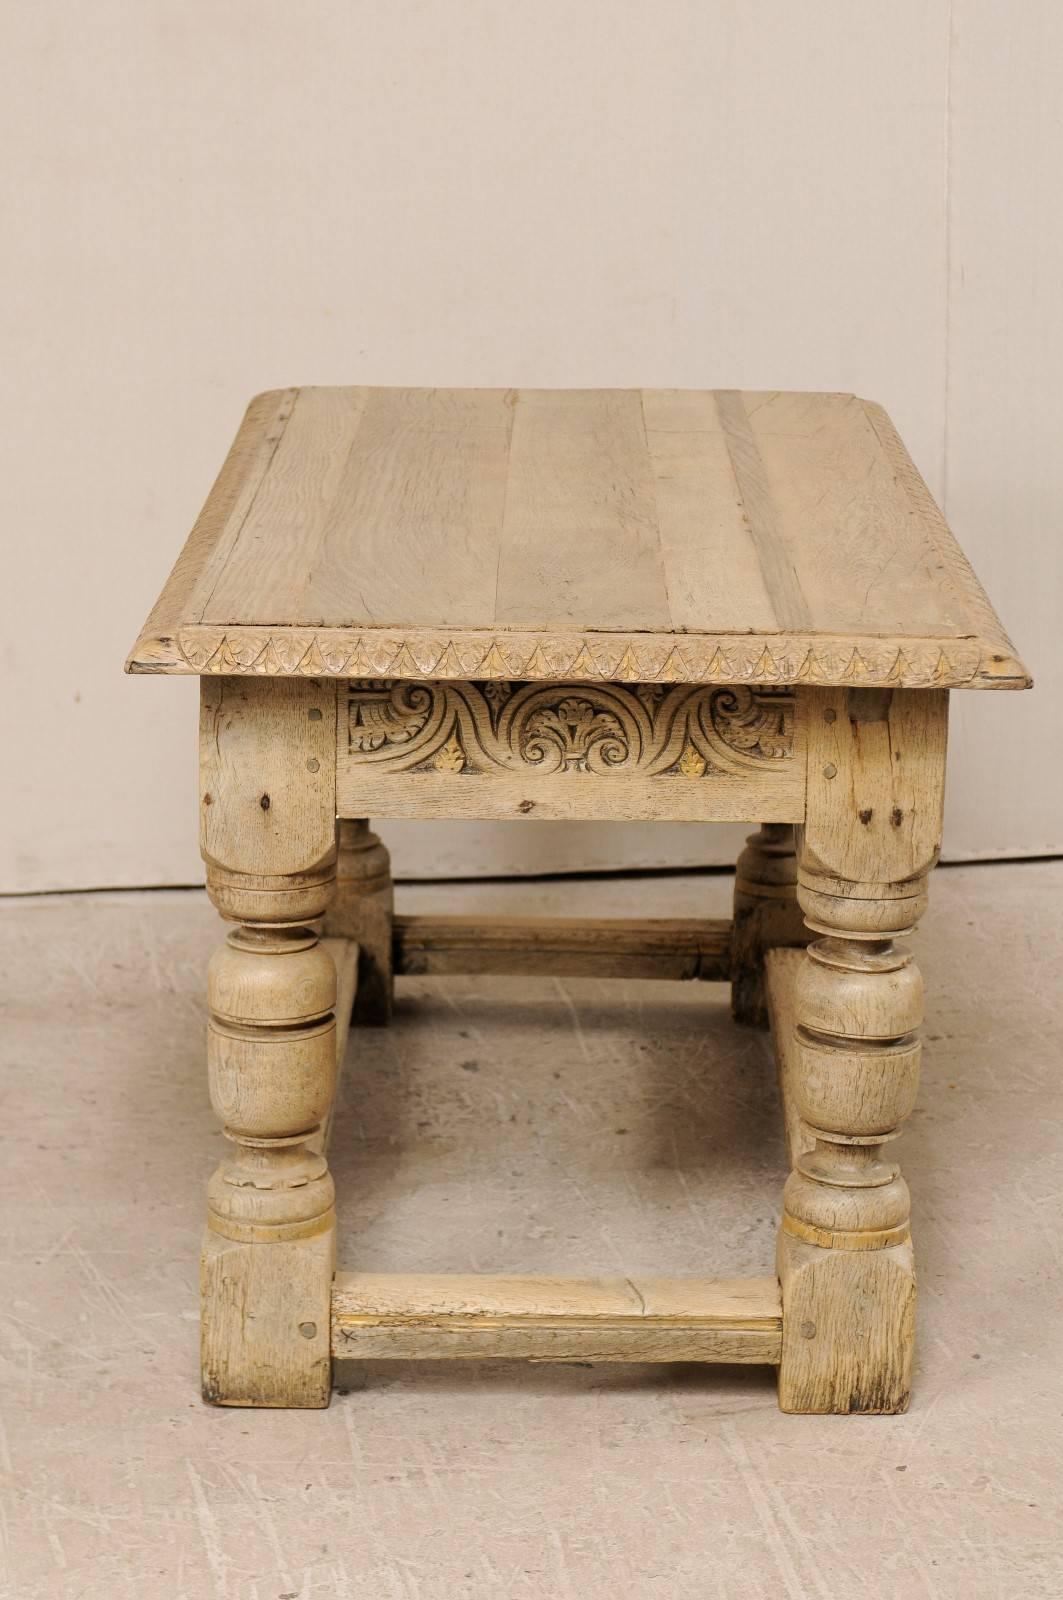 French 19th C. Table w/ Robust Baluster Legs & Nicely Carved and Adorn Apron 4